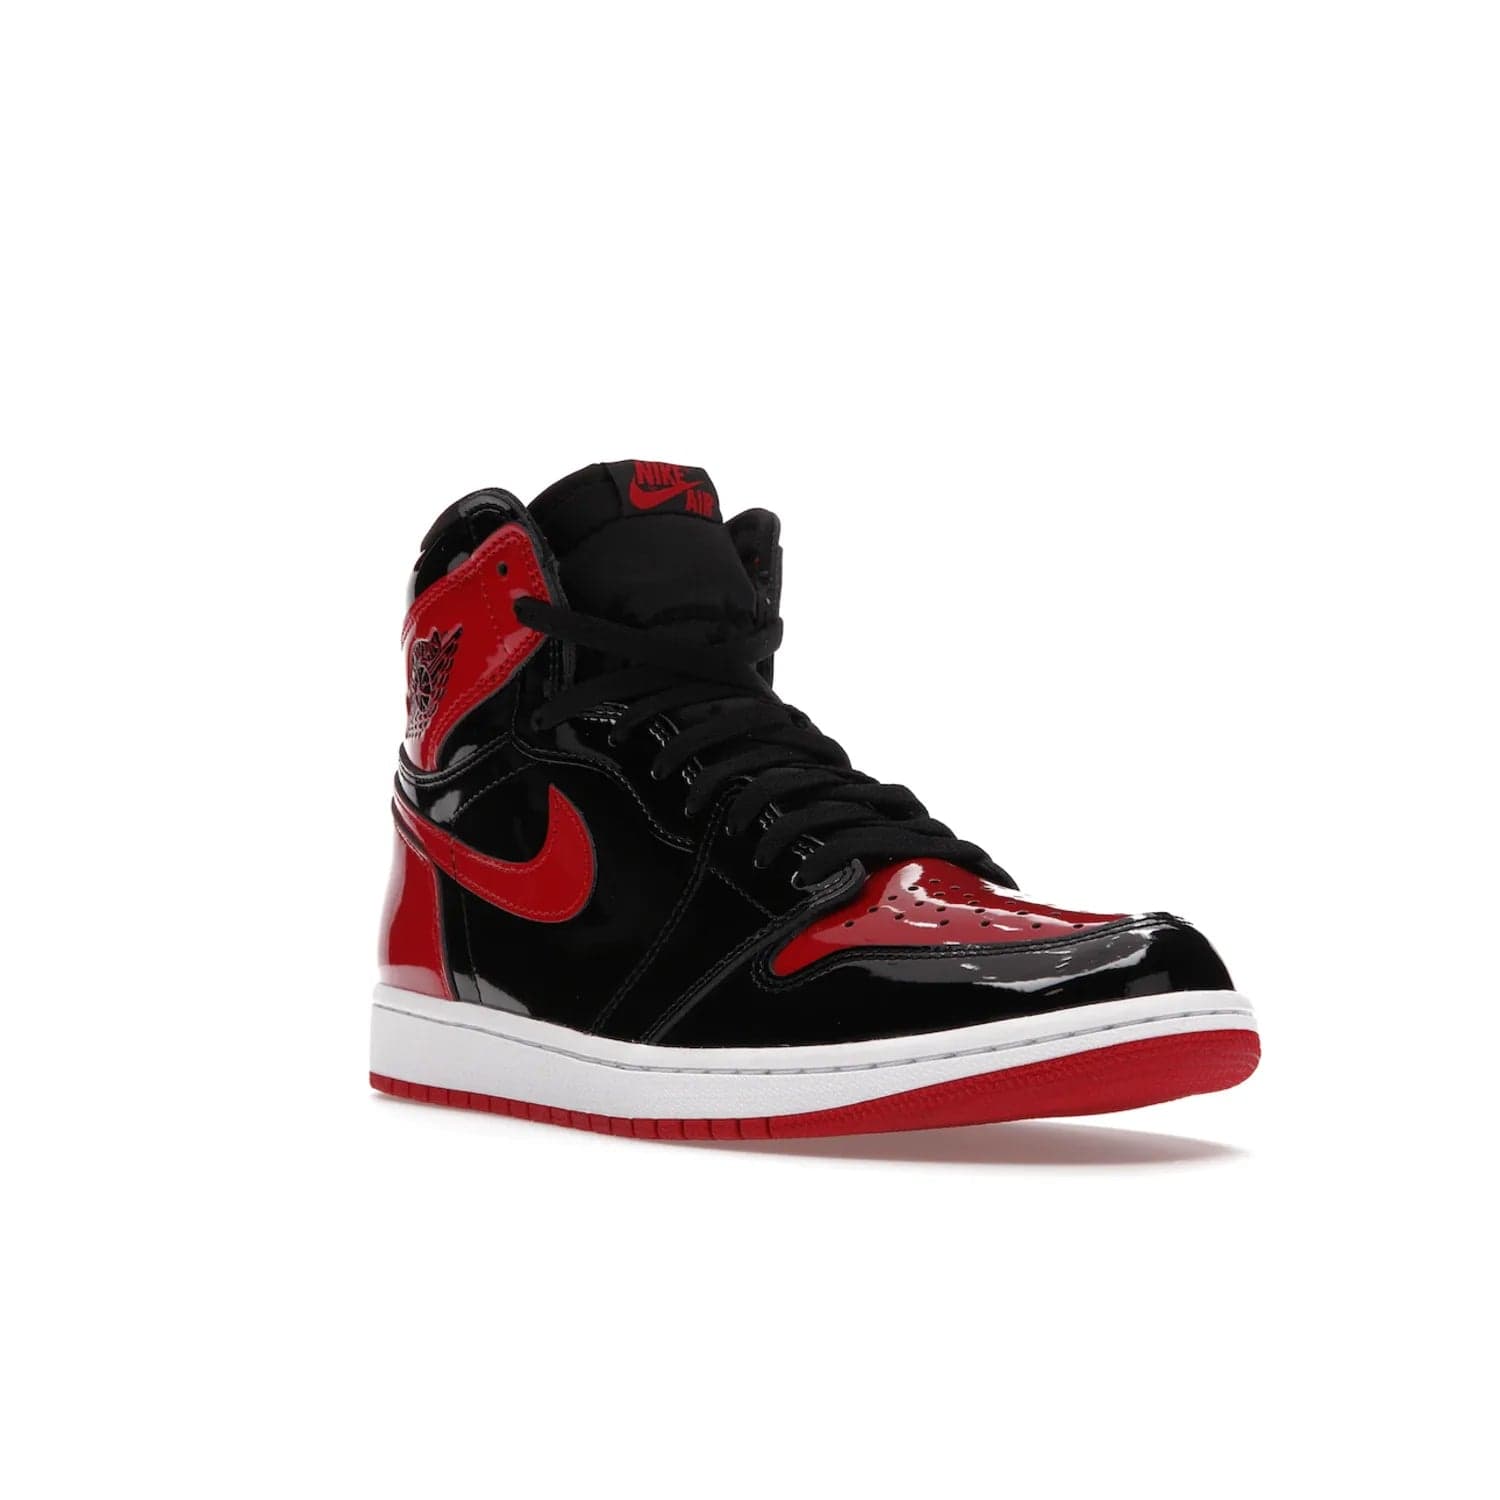 Jordan 1 Retro High OG Patent Bred - Image 6 - Only at www.BallersClubKickz.com - Introducing Air Jordan 1 Retro High OG Patent Bred - sleek patent leather upper, signature weaved Nike Air tongue and classic Wings logo on collar. Red and white sole complete signature look. Releasing December 2021 - perfect retro edition for holidays.